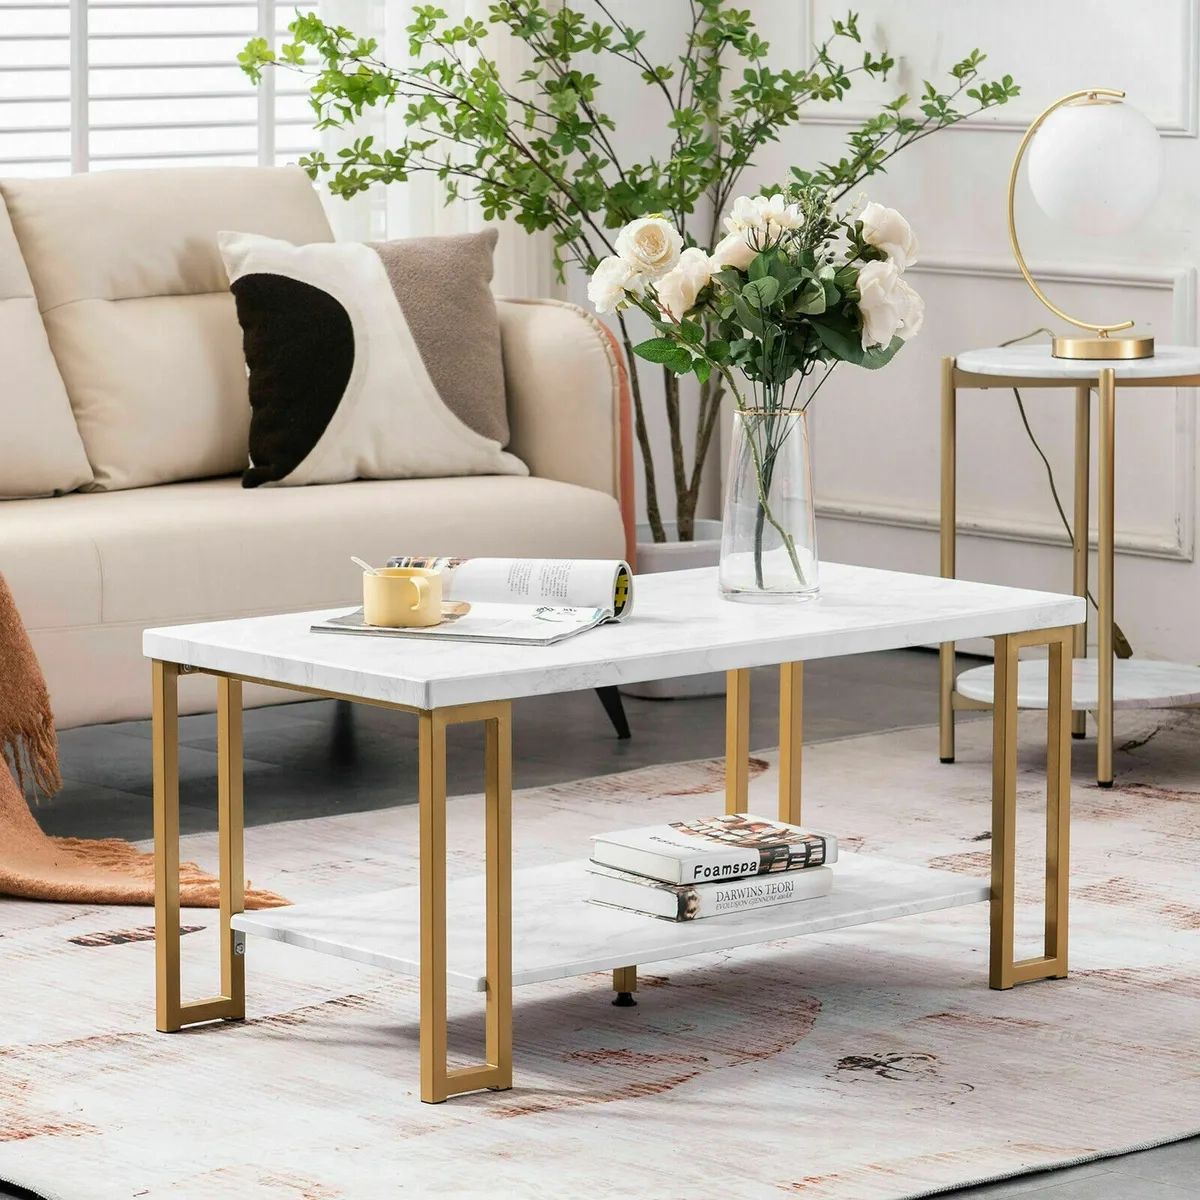 Modern Living Room Rectangle Coffee Table White Faux Marble Top &gold Base  Shelf | Ebay Regarding Simple Design Coffee Tables (View 7 of 15)